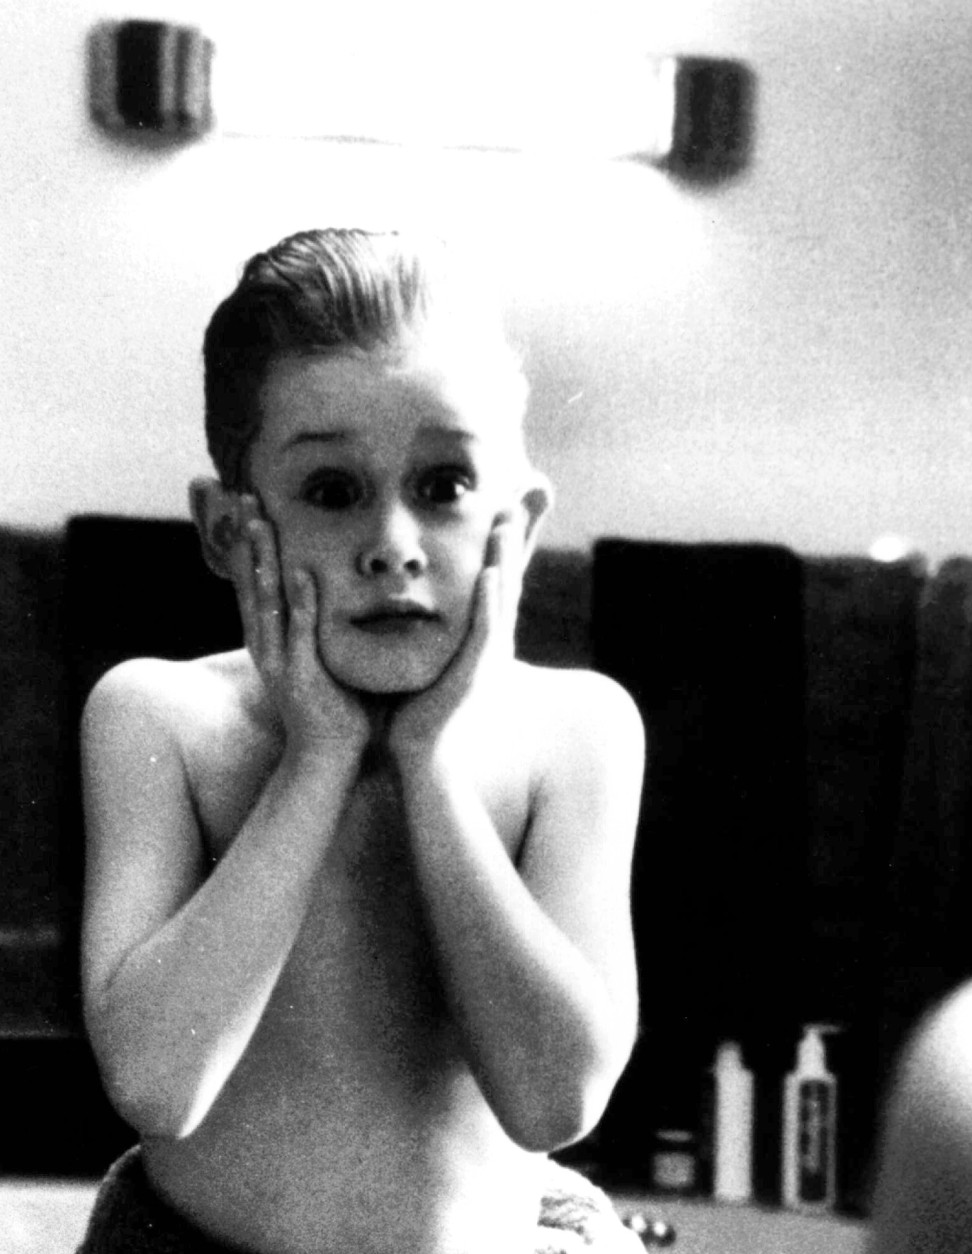 Macaulay Culkin is shown in character in this 1990 file photo from the film "Home Alone."  (AP Photo)